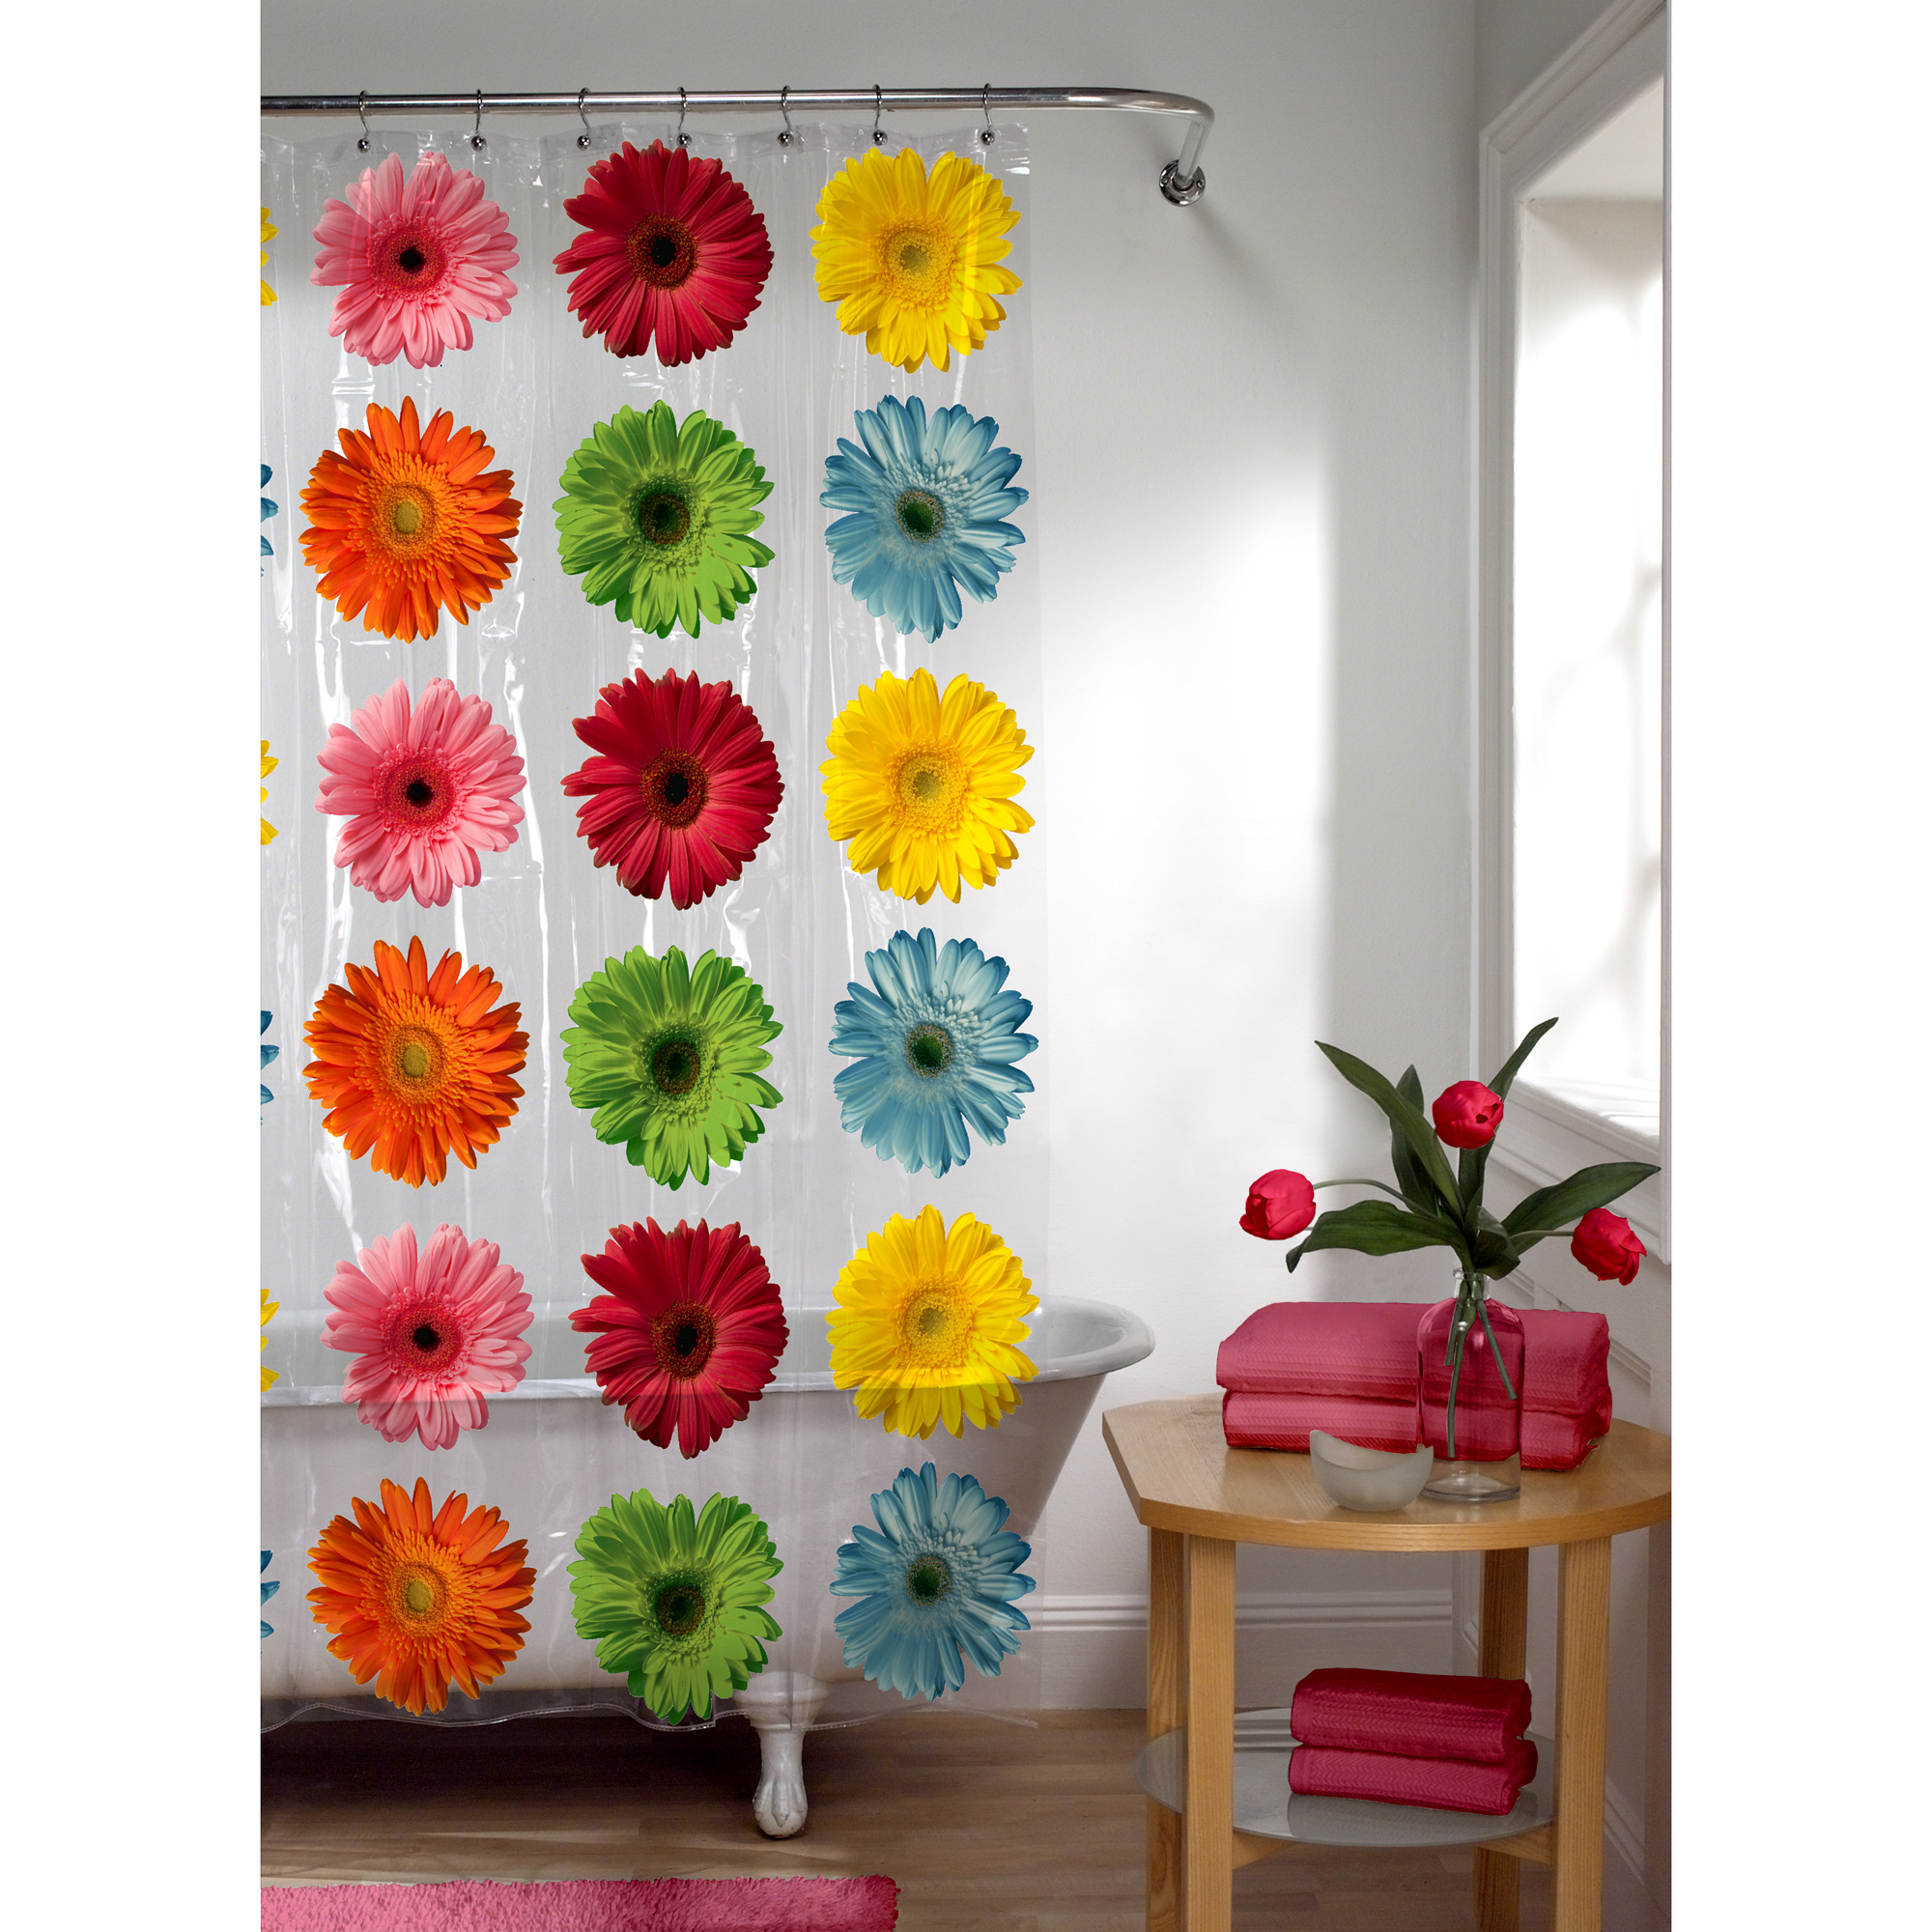 Gerber Daisy PEVA Shower Curtain, Floral - image 1 of 5